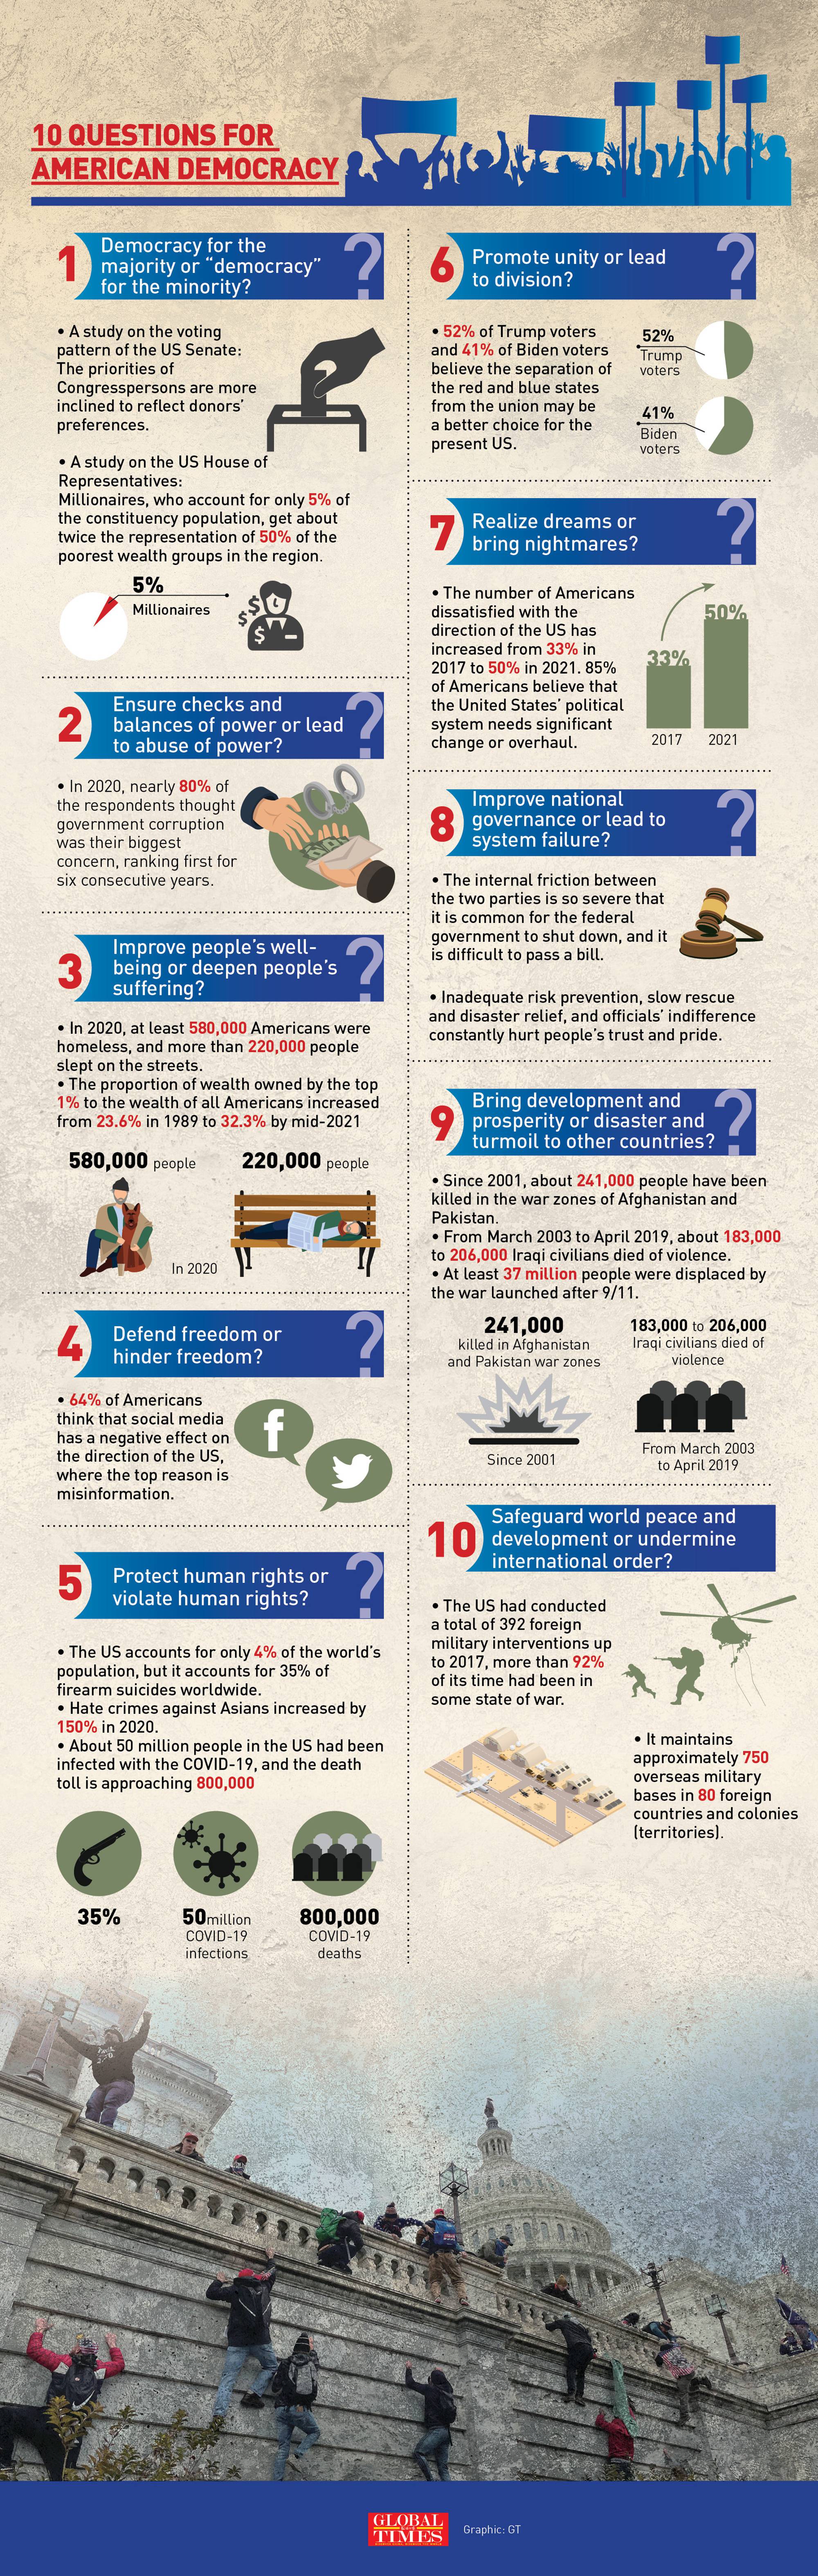 10 questions for American Democracy. Graphic:GT